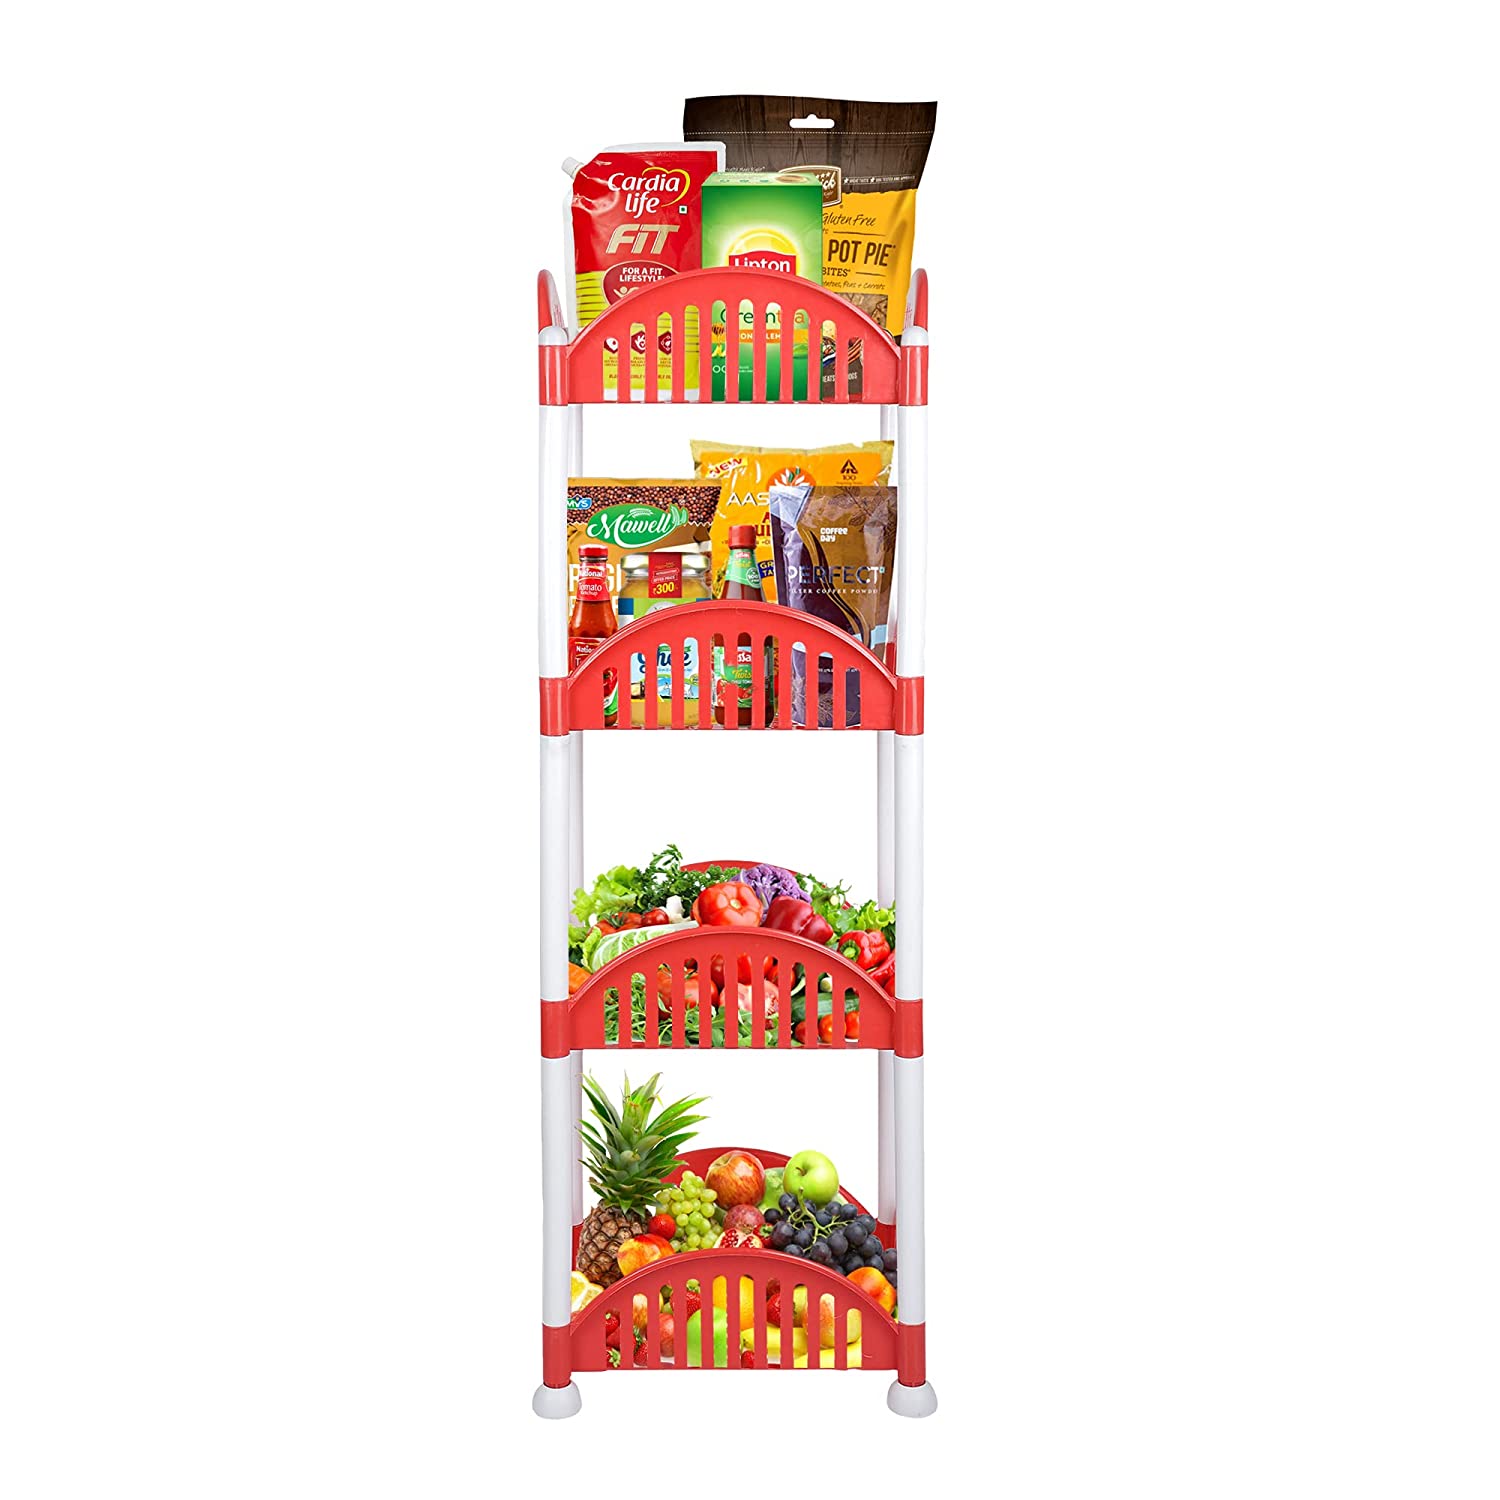 Cutting EDGE Premium Eco-Plastic Shelf Rack 32x23 CM - 4 Layer, For Kitchen & Office Use, Fruits, Vegetables, Onion, Sabji Tier Basket Tray & Stand, Multipurpose Use for Home, Cosmetics Super Sturdy Organizer Storage